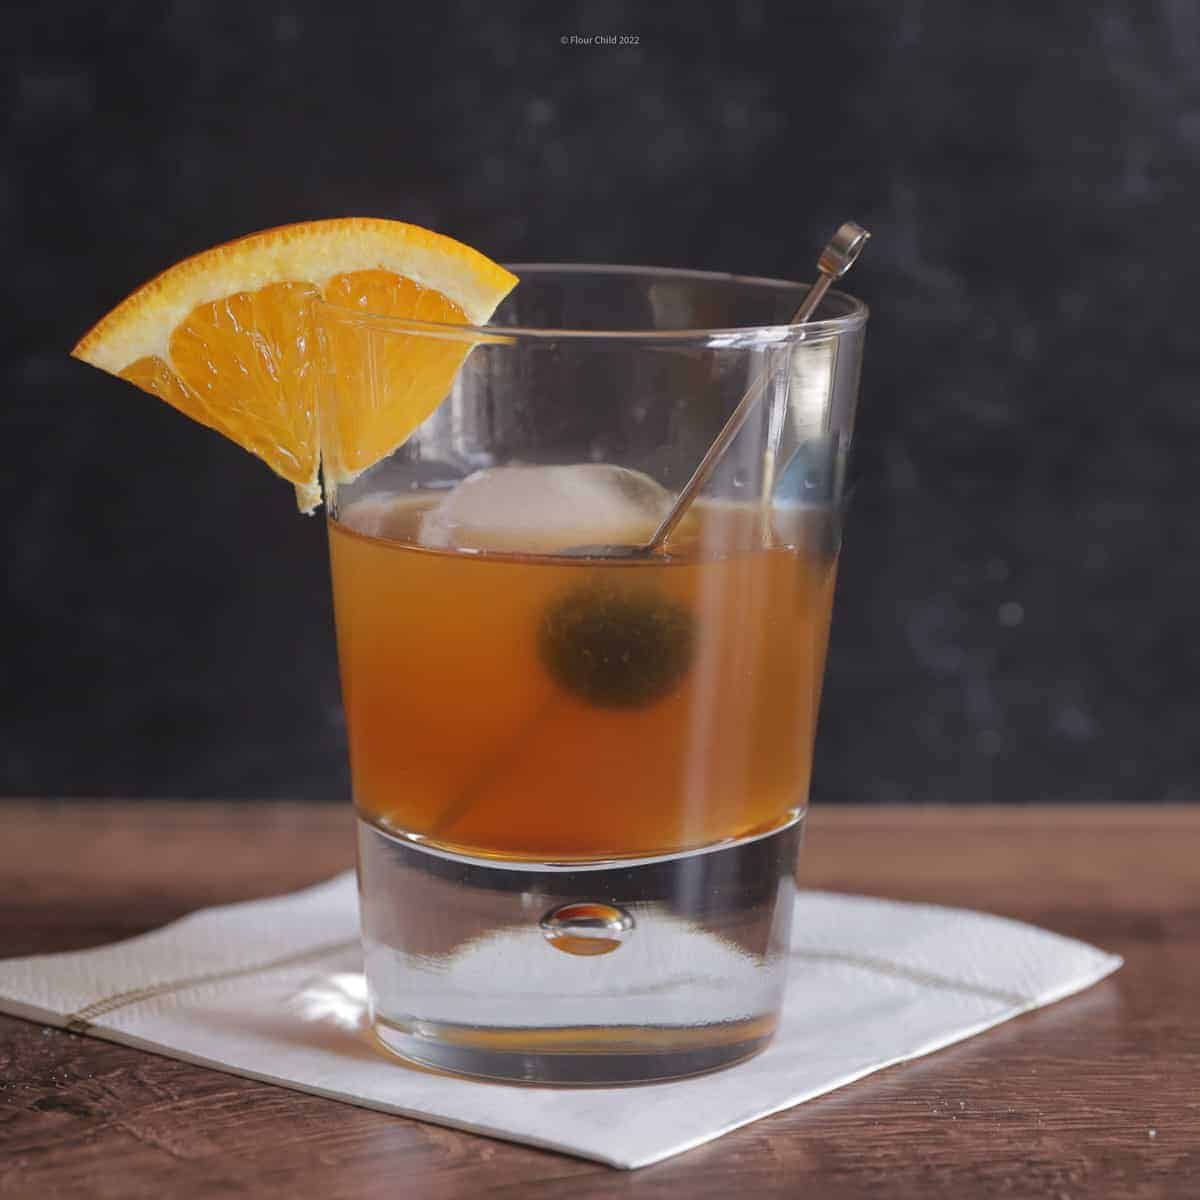 A classic amaretto sour cocktail in an old-fashioned glass with orange slice and cherry. This is the perfect amaretto sour recipe and a delicious sour drink. This is a perfect cocktail and one of the classic cocktail recipes.